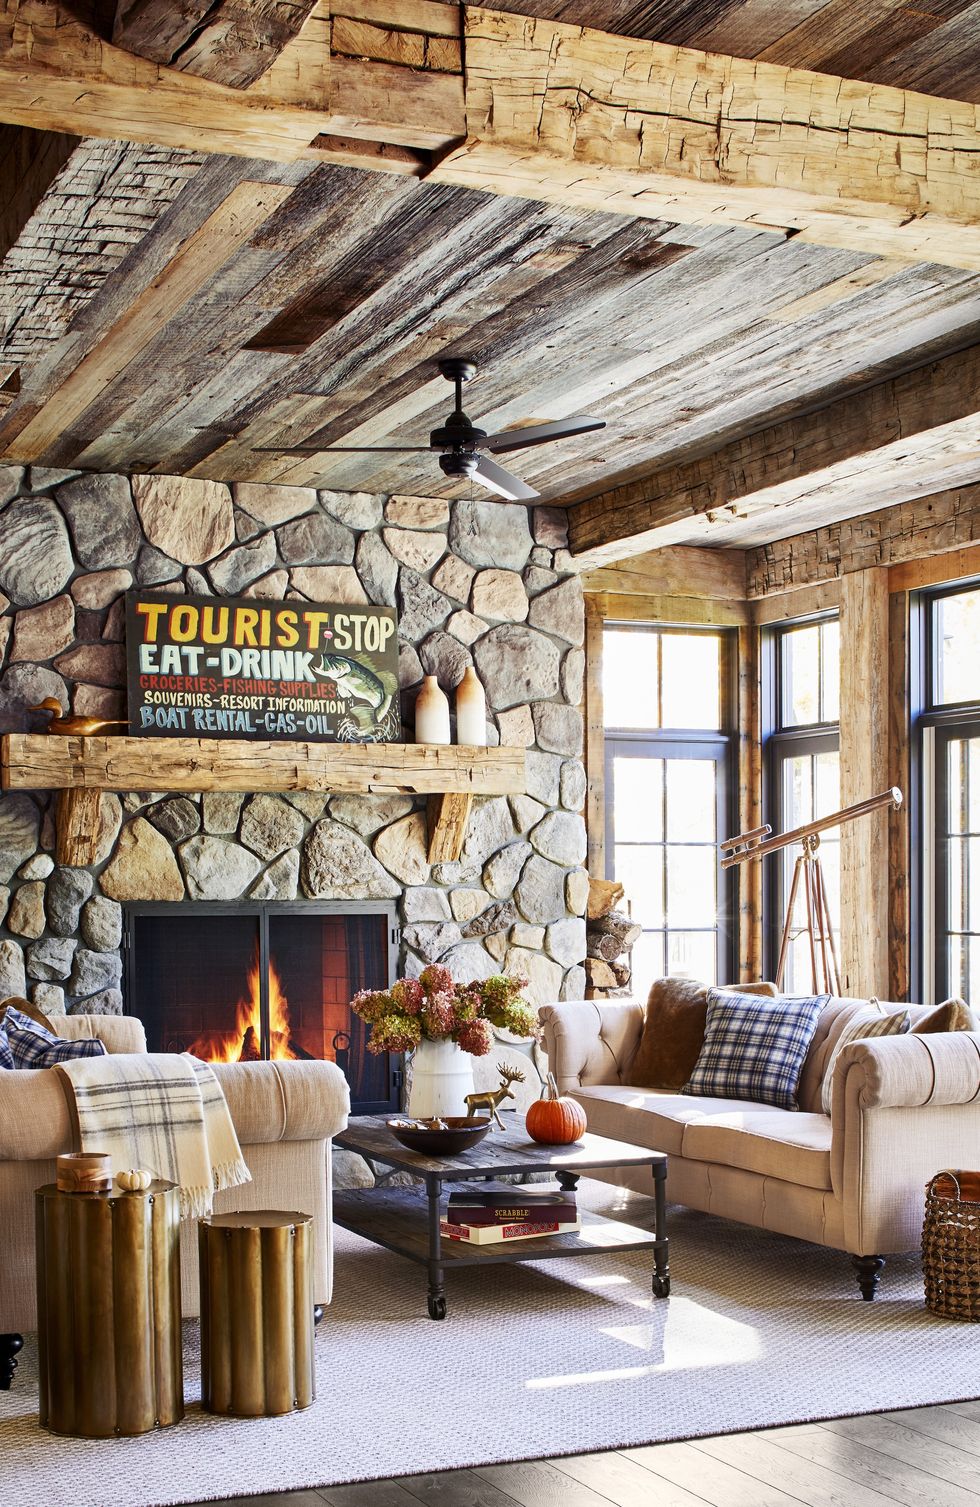 https://hips.hearstapps.com/hmg-prod/images/rustic-living-room-stone-fireplace-wood-beams-1569464905.jpg?crop=0.951xw:0.975xh;0.0187xw,0.00114xh&resize=980:*